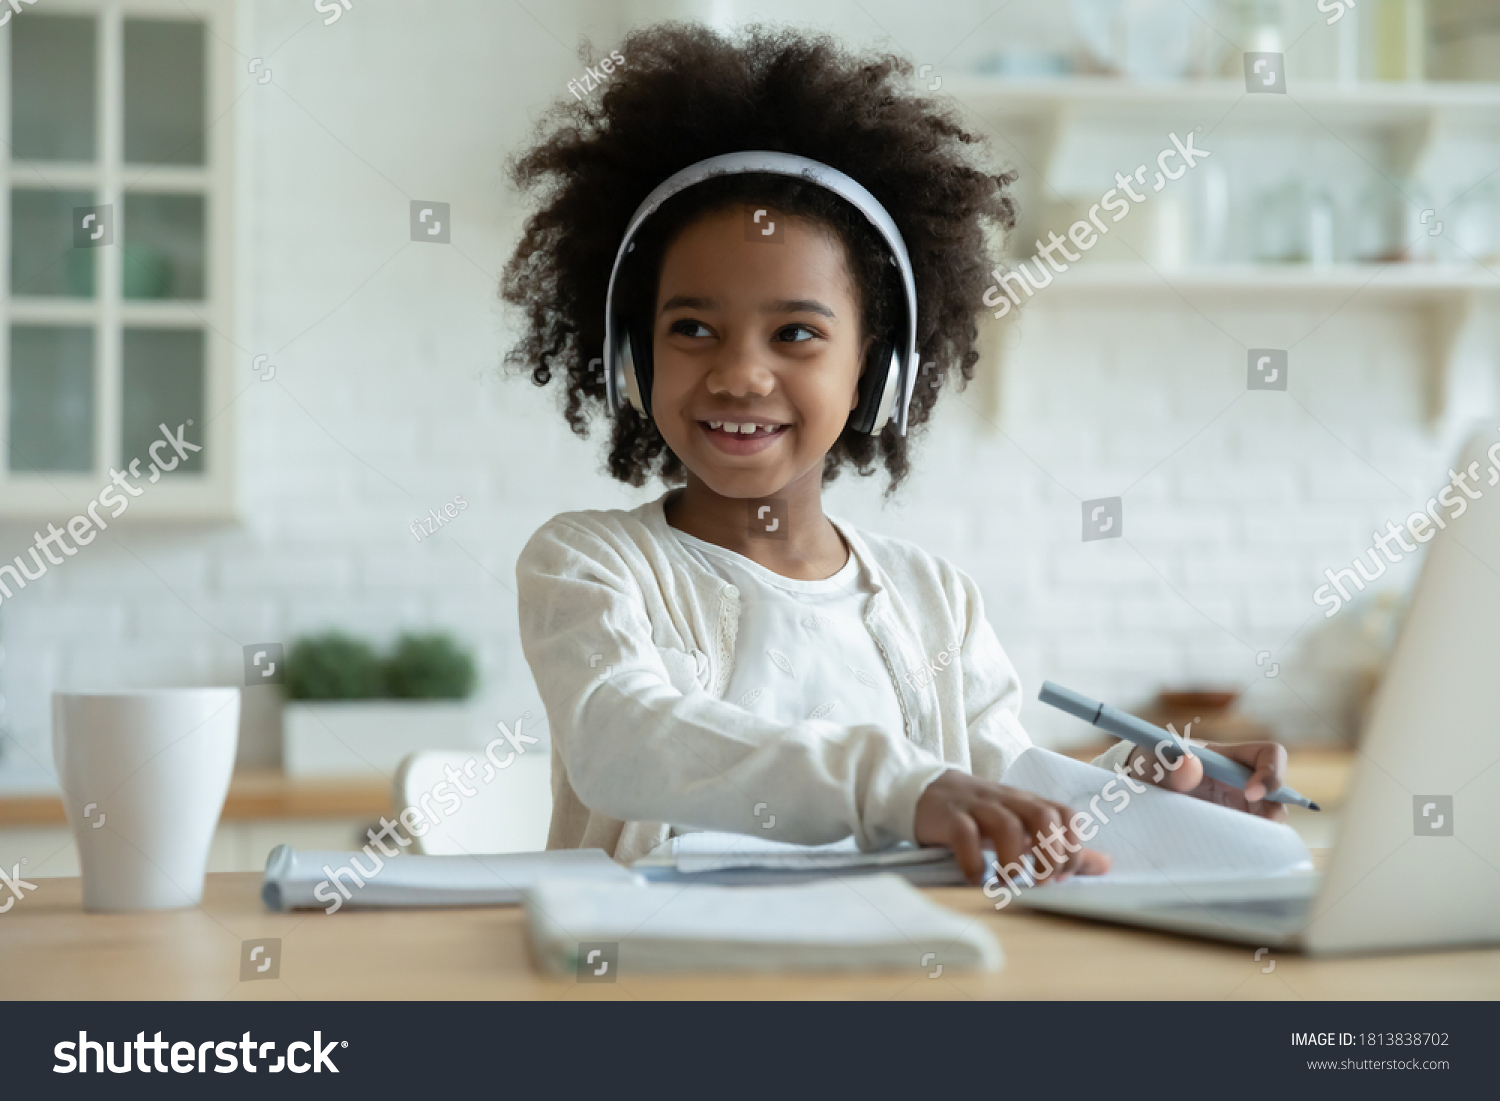 Distracted from e-learning happy playful small mixed race kid girl in headphones looking away. Smiling pretty african american little child enjoying listening lecture, remote education concept. #1813838702